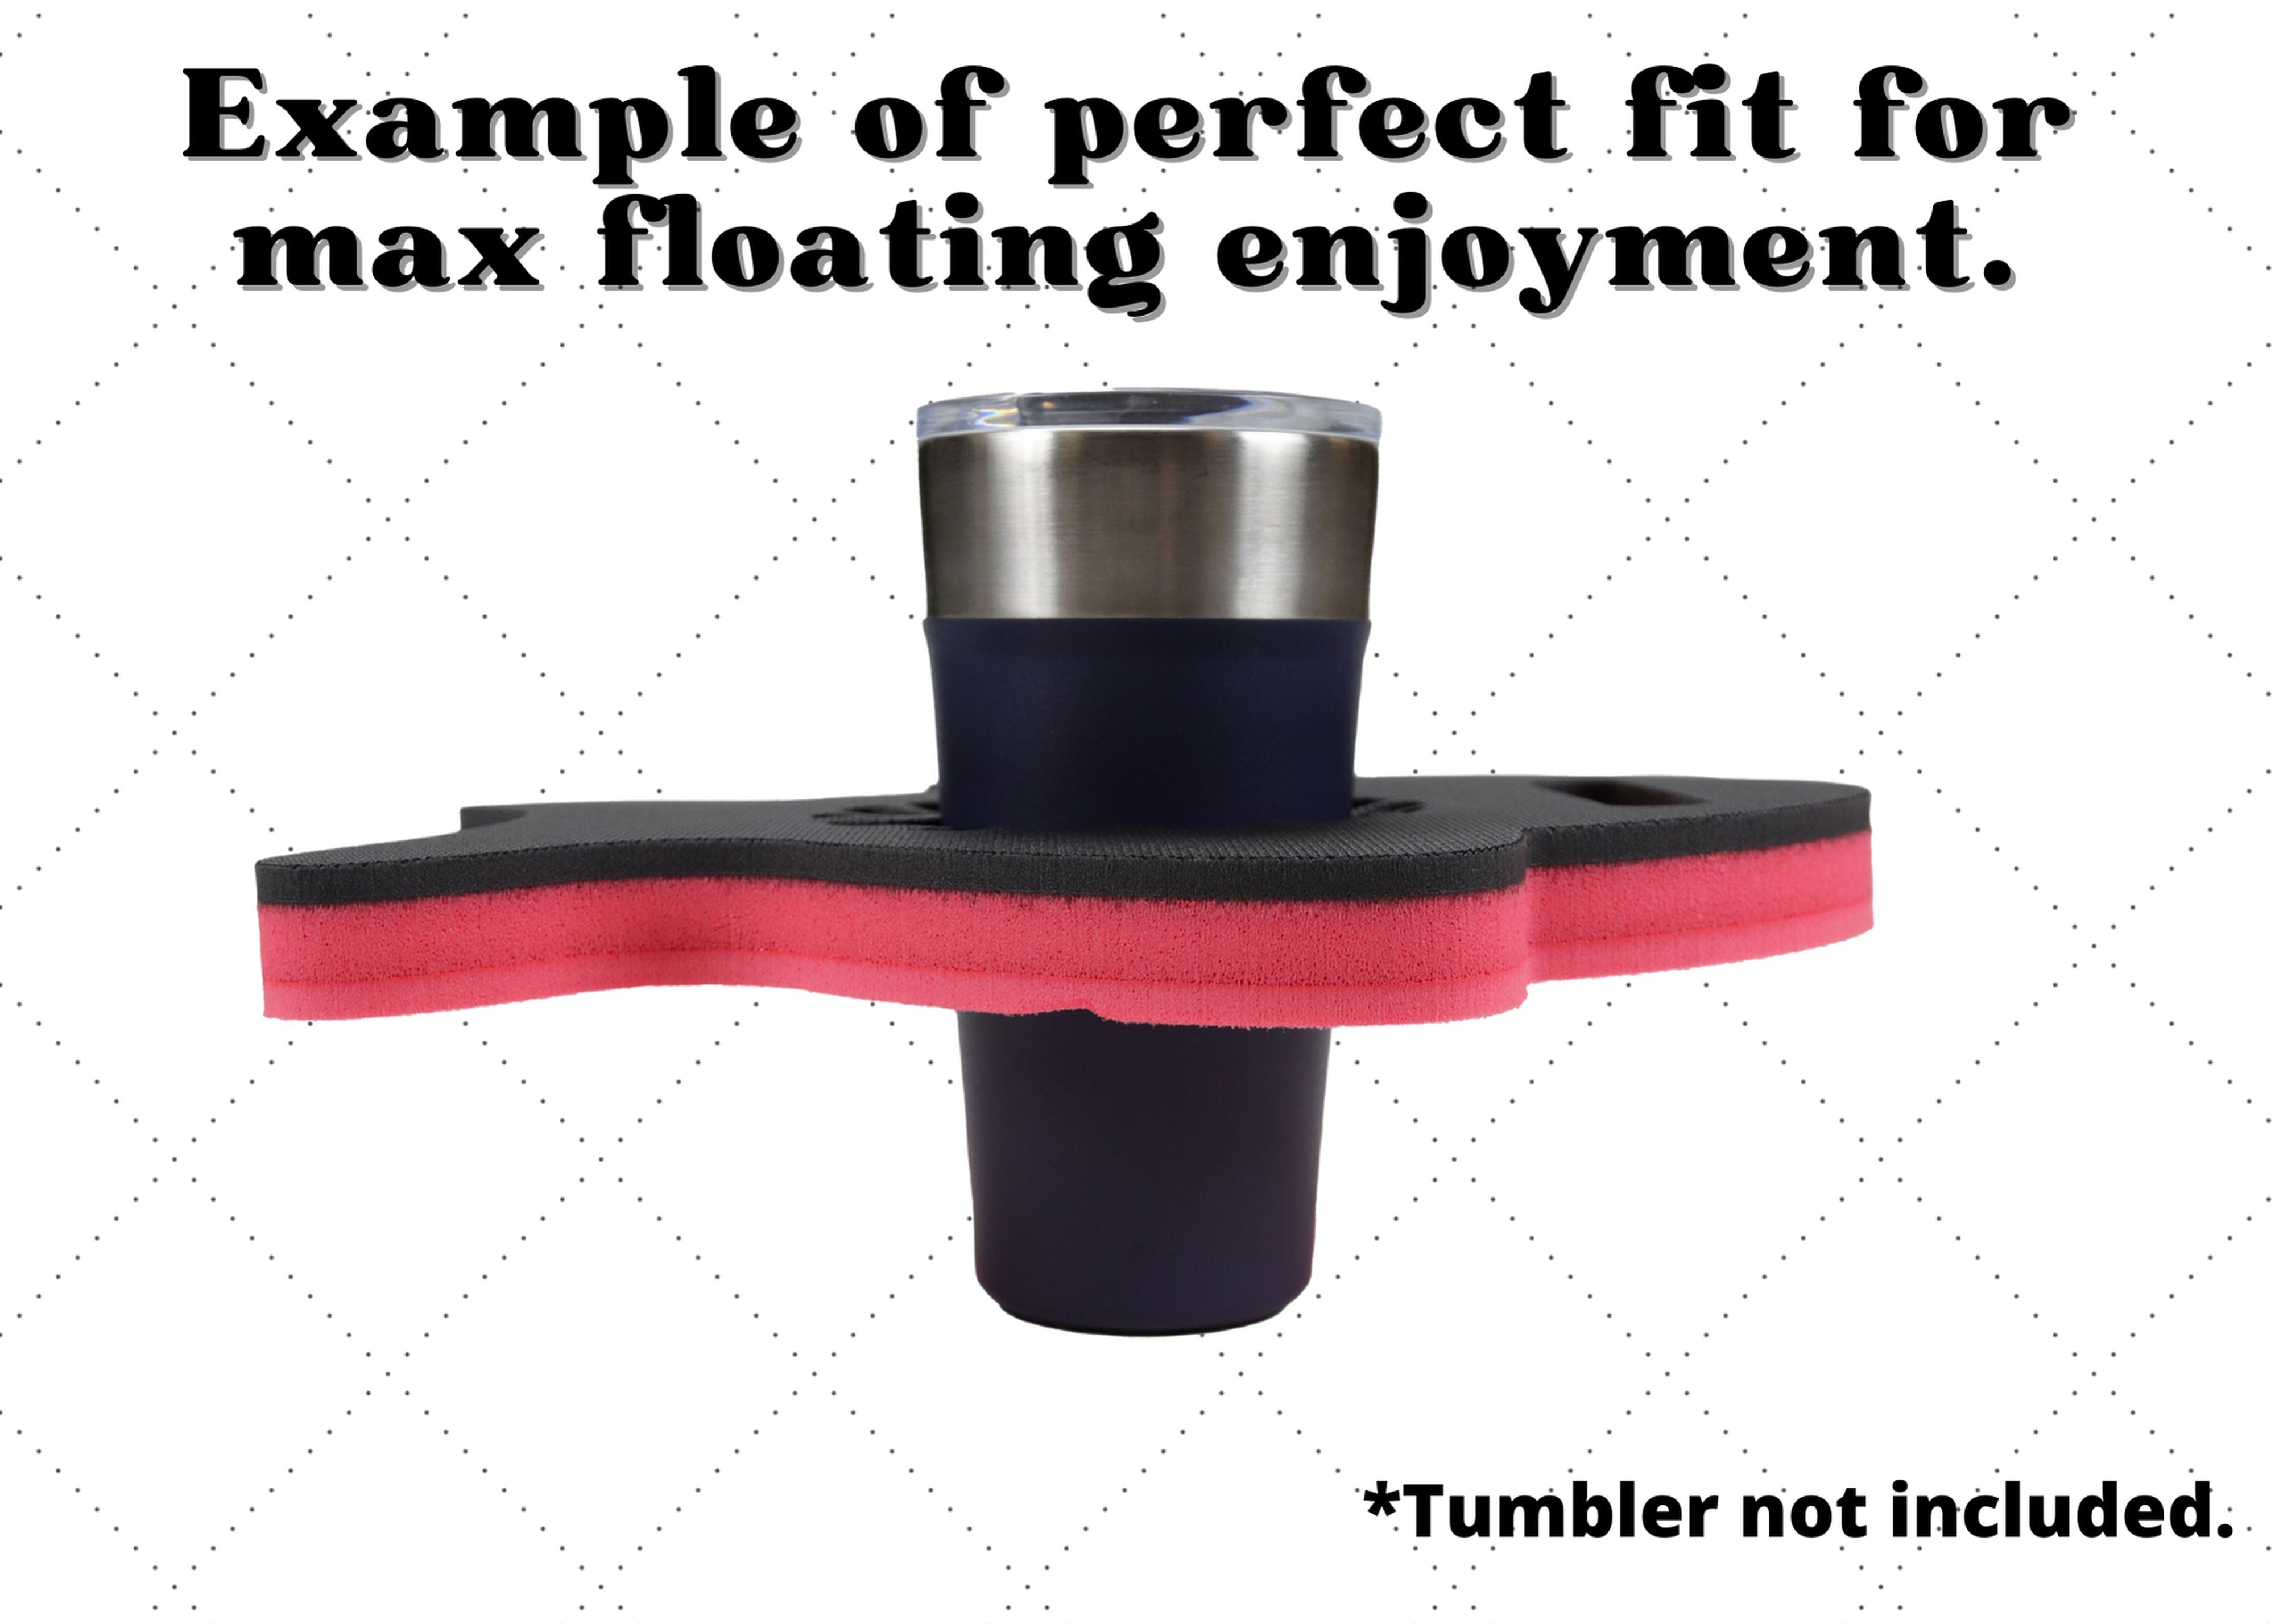 Universal Fish Tumbler Holder Floating Drink Pool Durable Foam 11.75 In fit 16 to 30 Oz Compatible with YETI Ozark Trail RTIC More One Size Fits All